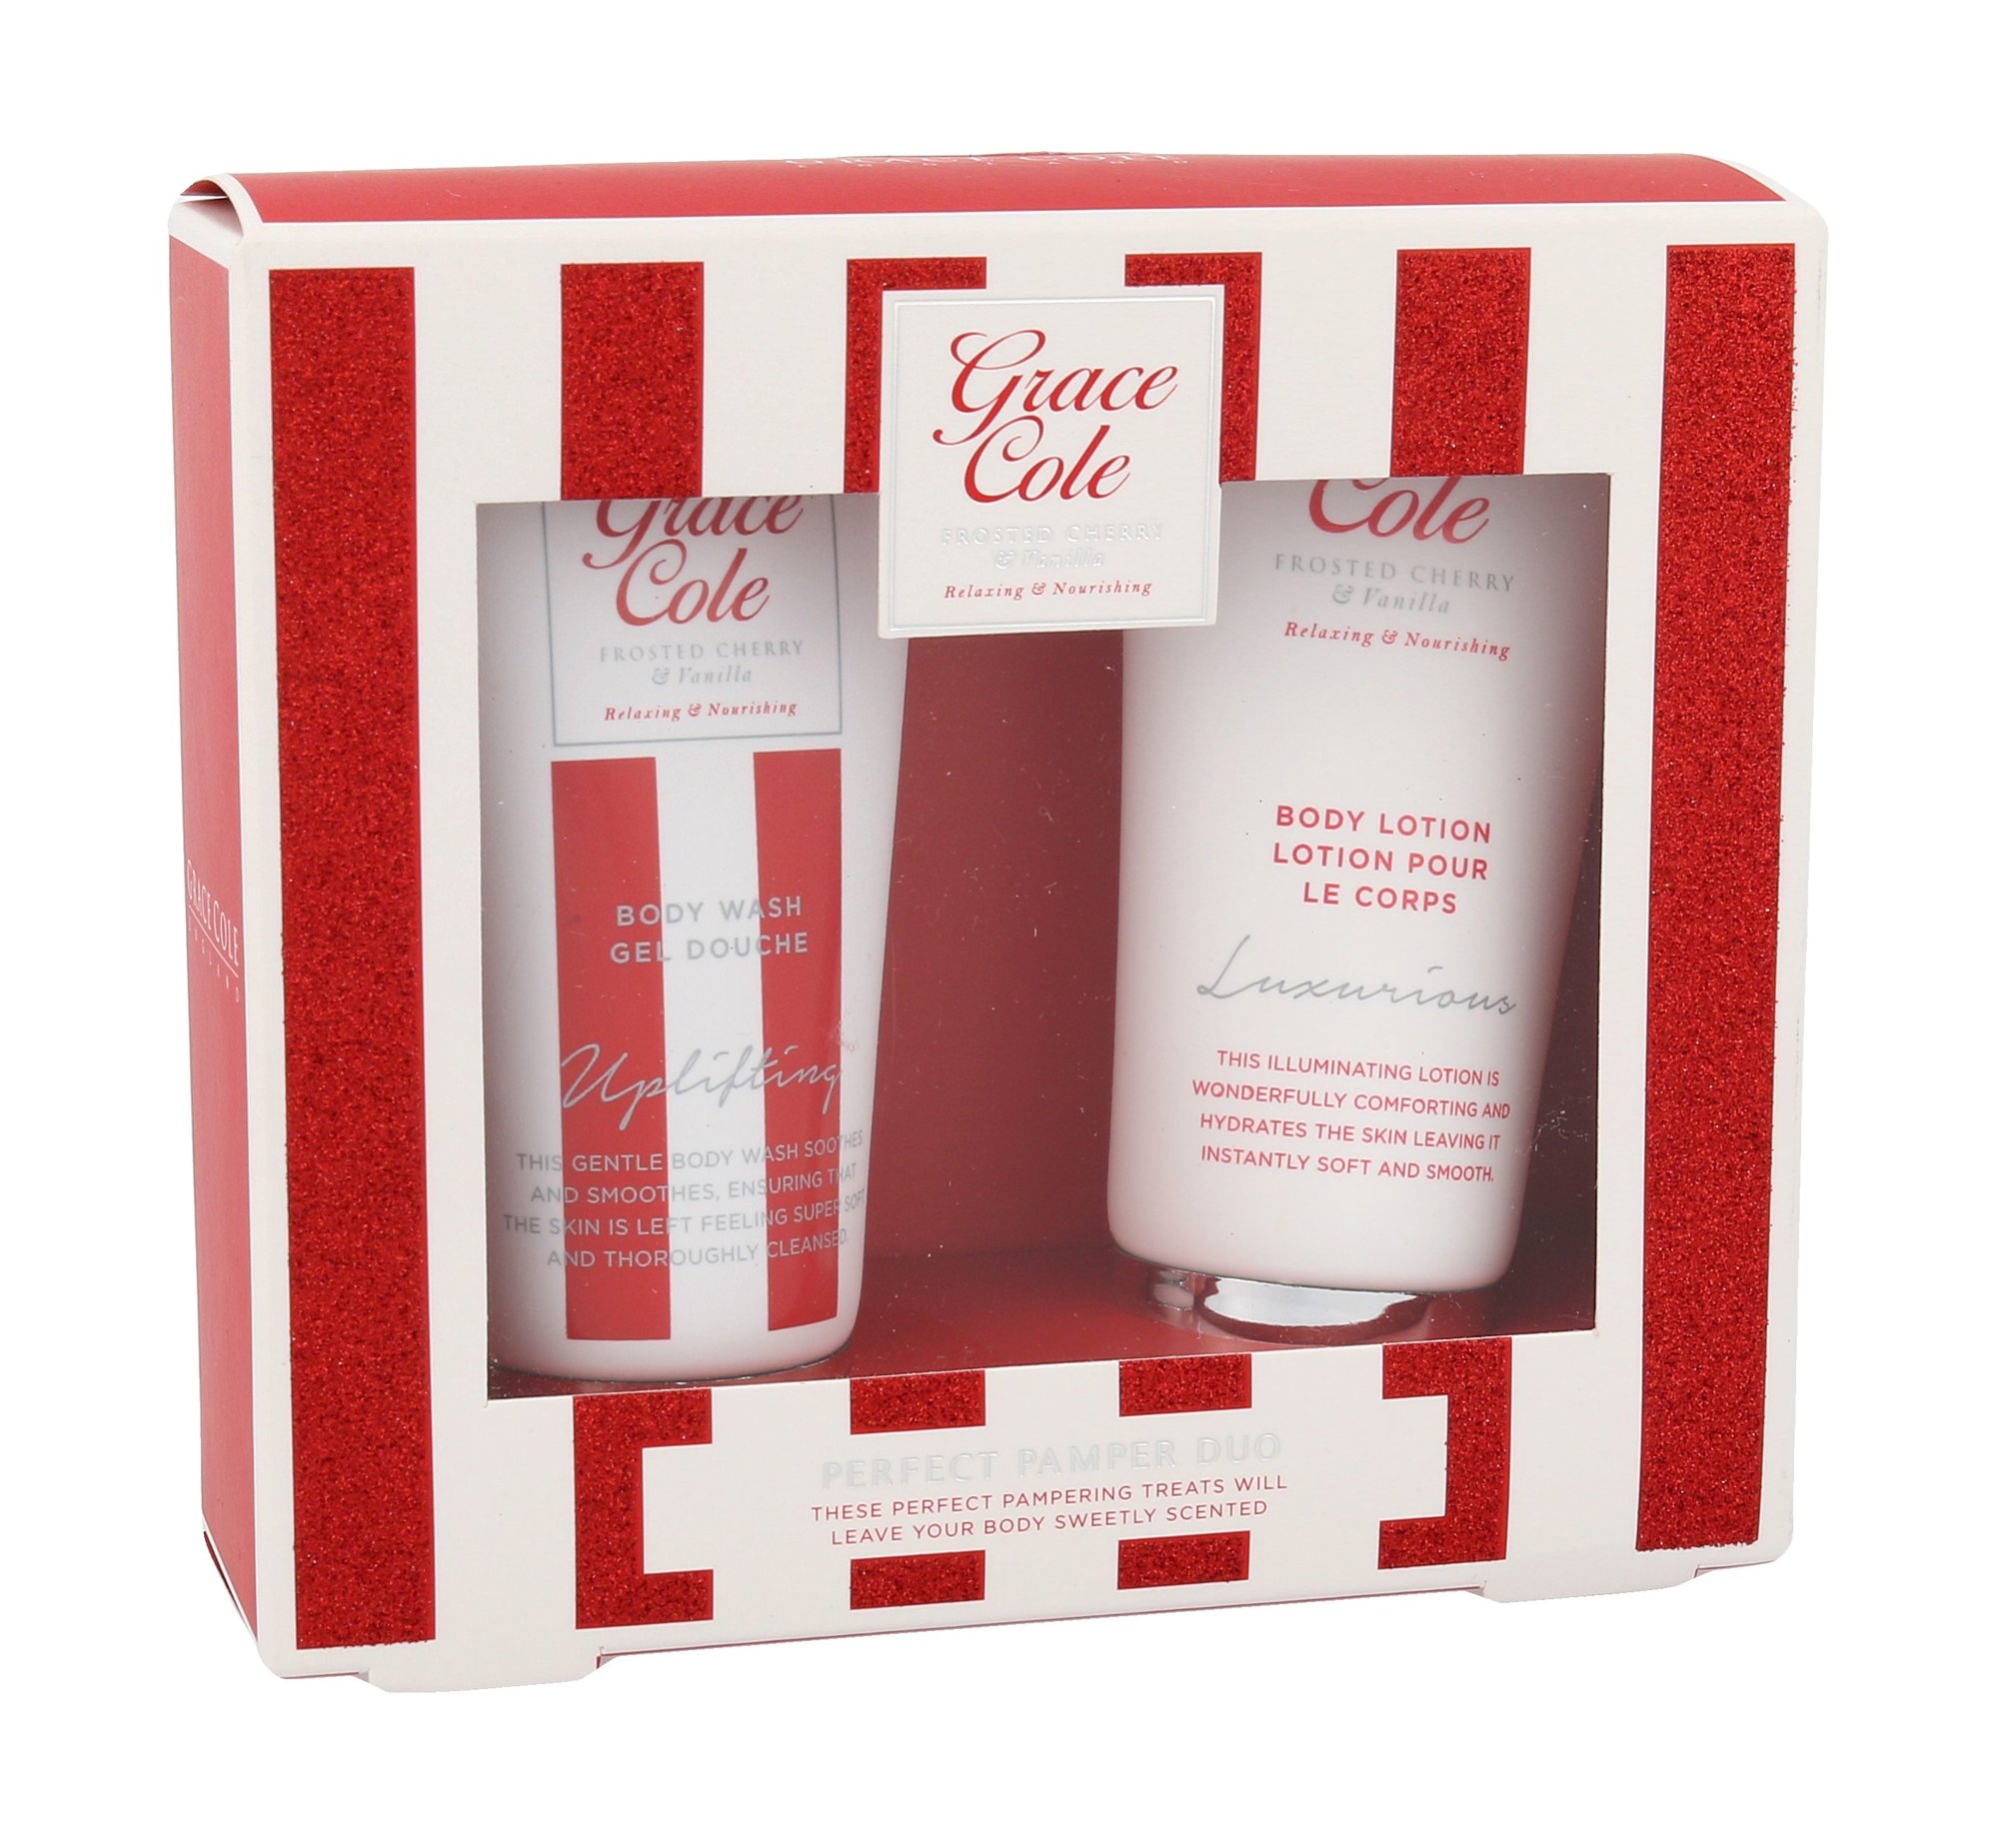 Grace Cole Frosted Cherry & Vanilla Perfect Pamper Duo Kit